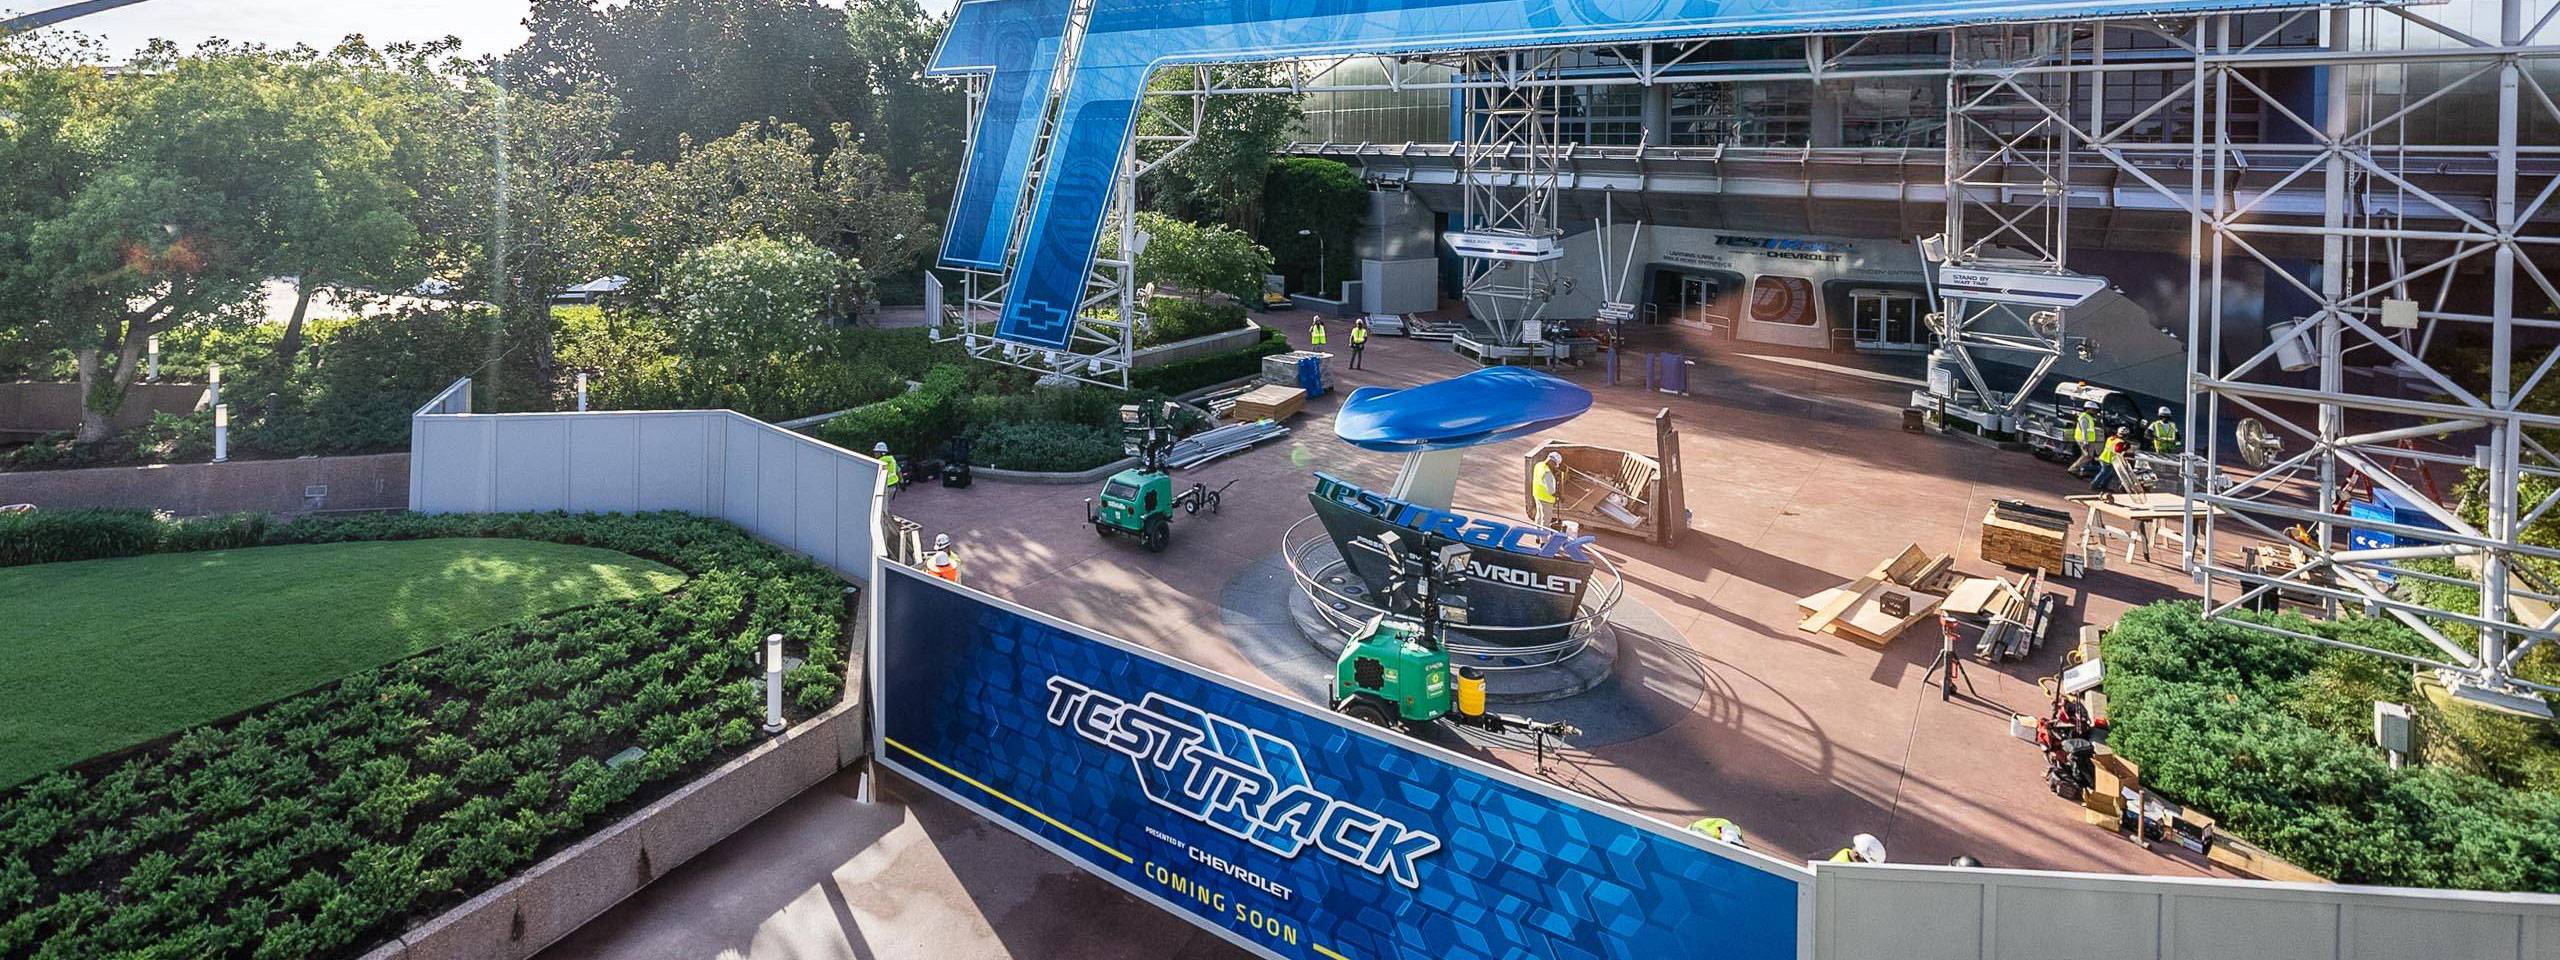 Disney Imagineering Files New Permit for EPCOT's Test Track Reimagining